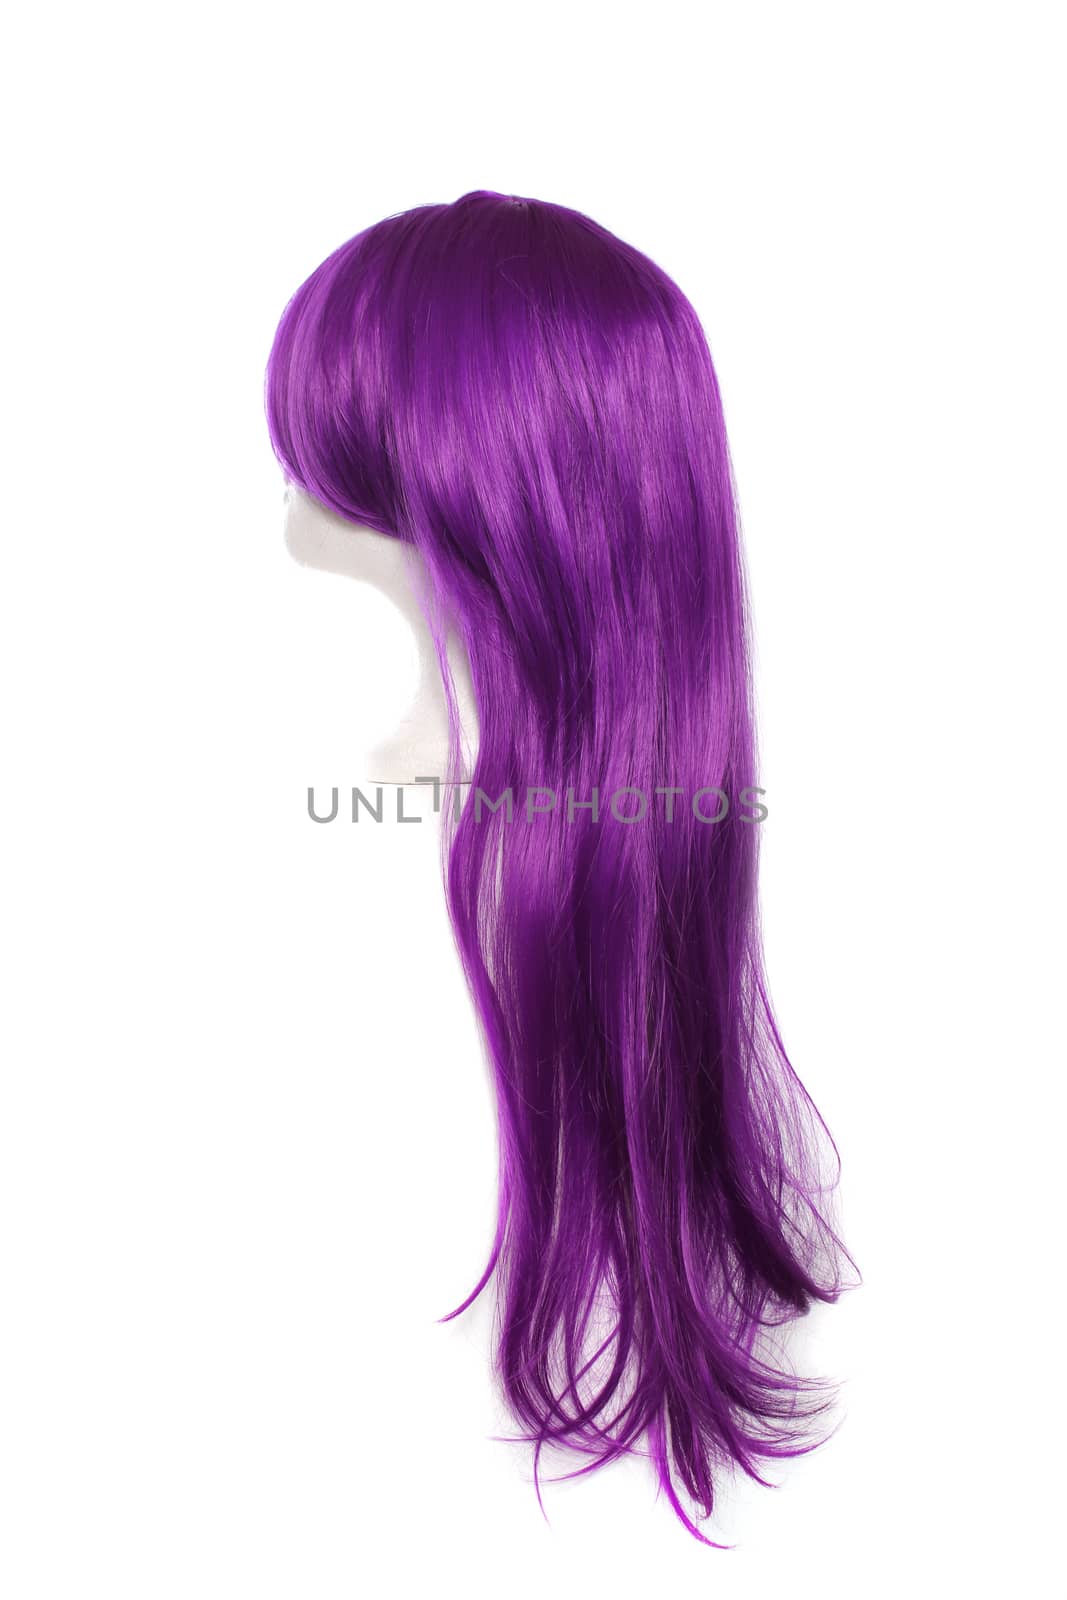 Purple Anime Style Wig on White by Marti157900